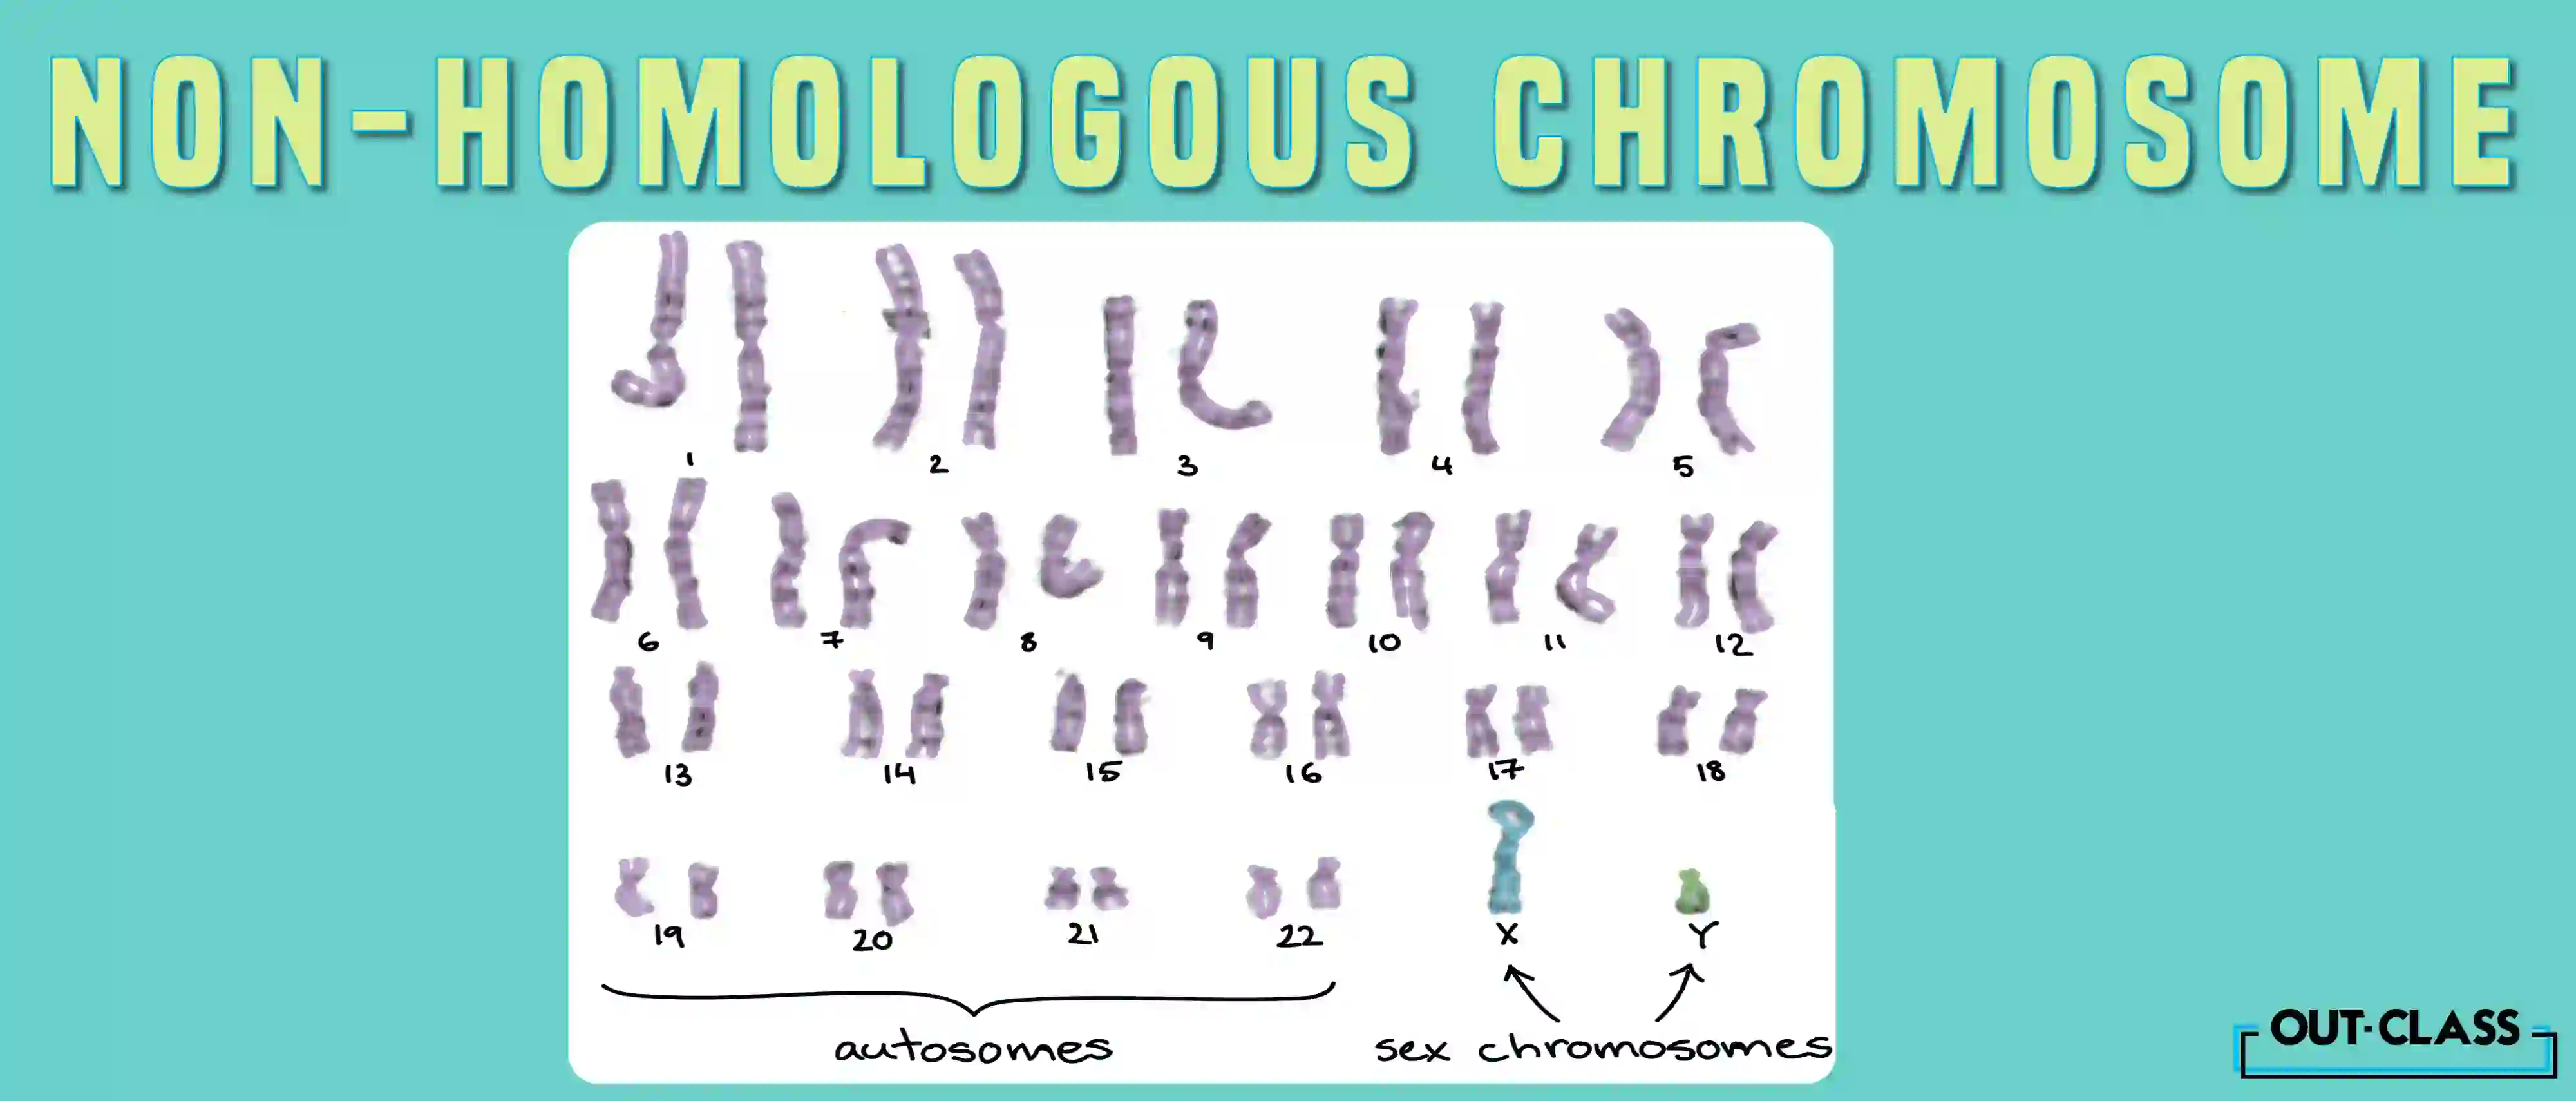 If you are asked to identify the non homologous chromosomes on this diagram, look for the pair that is structurally different, or the pair that doesn’t carry the same genes at the same spots.